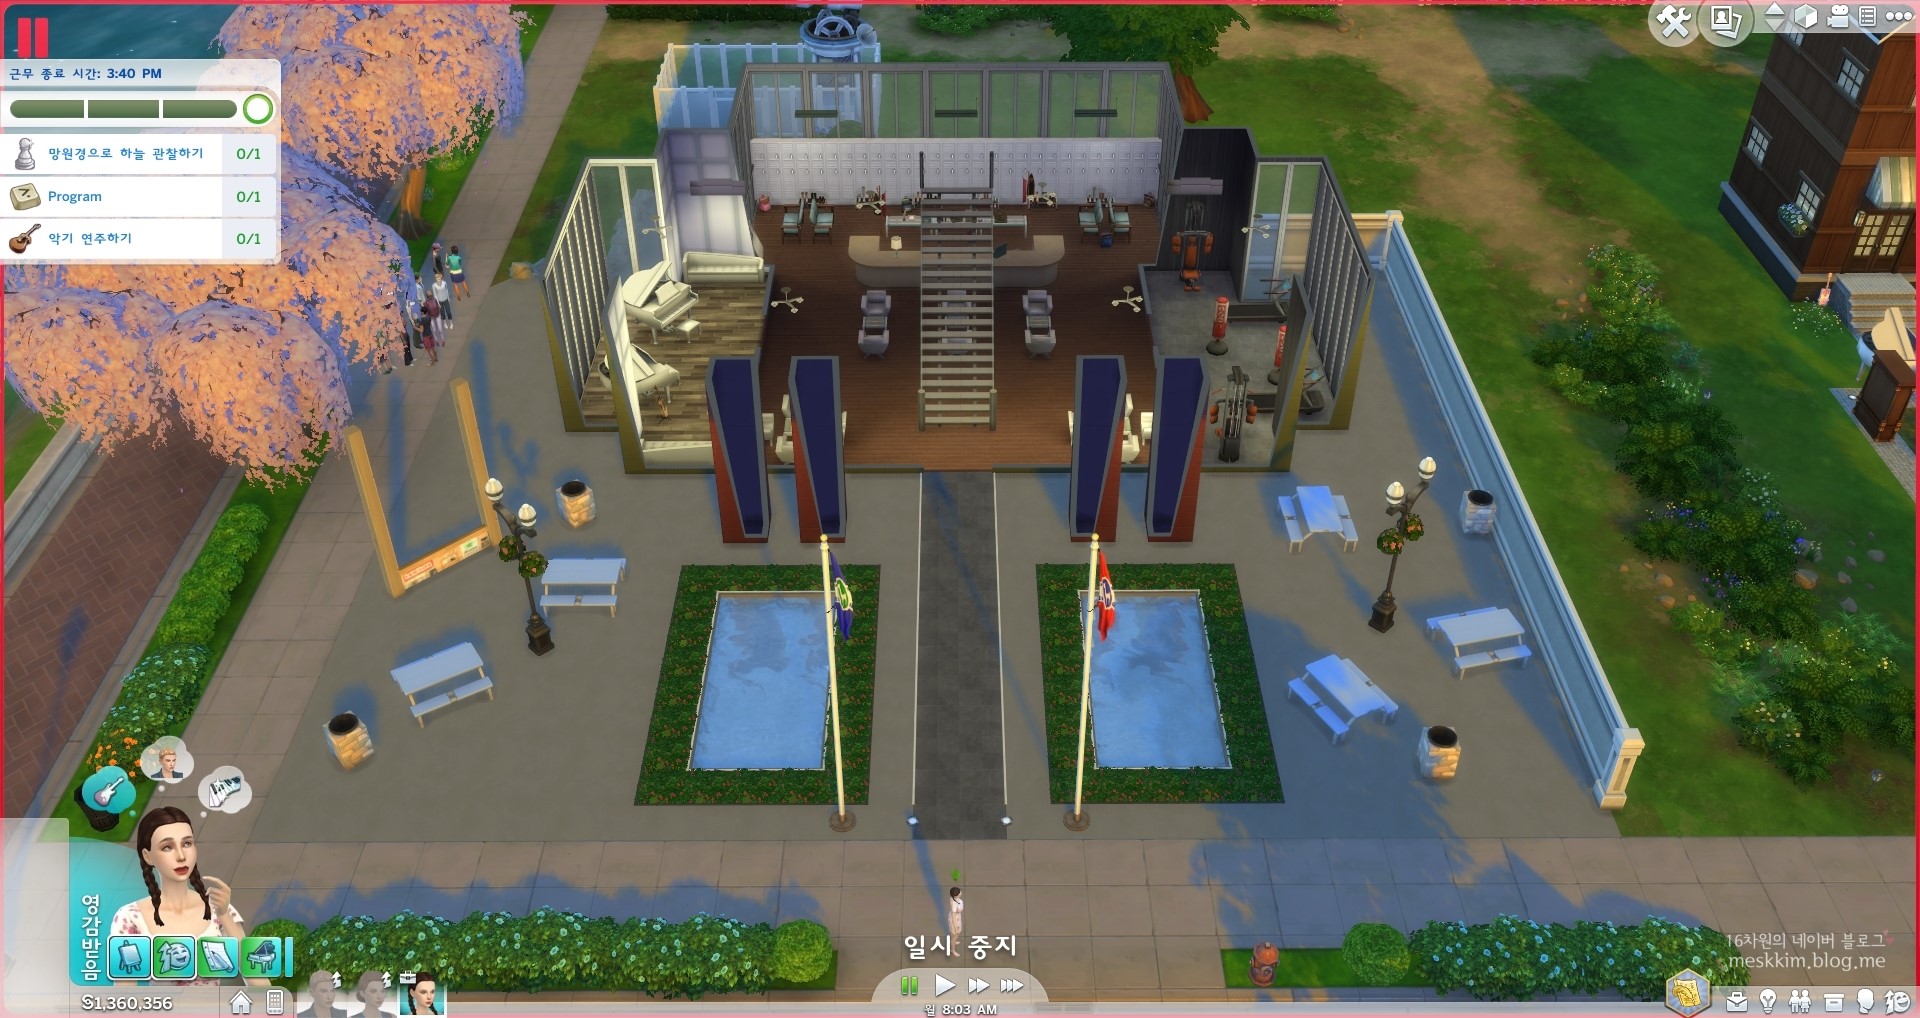 go to school mod for sims 4 download 2018